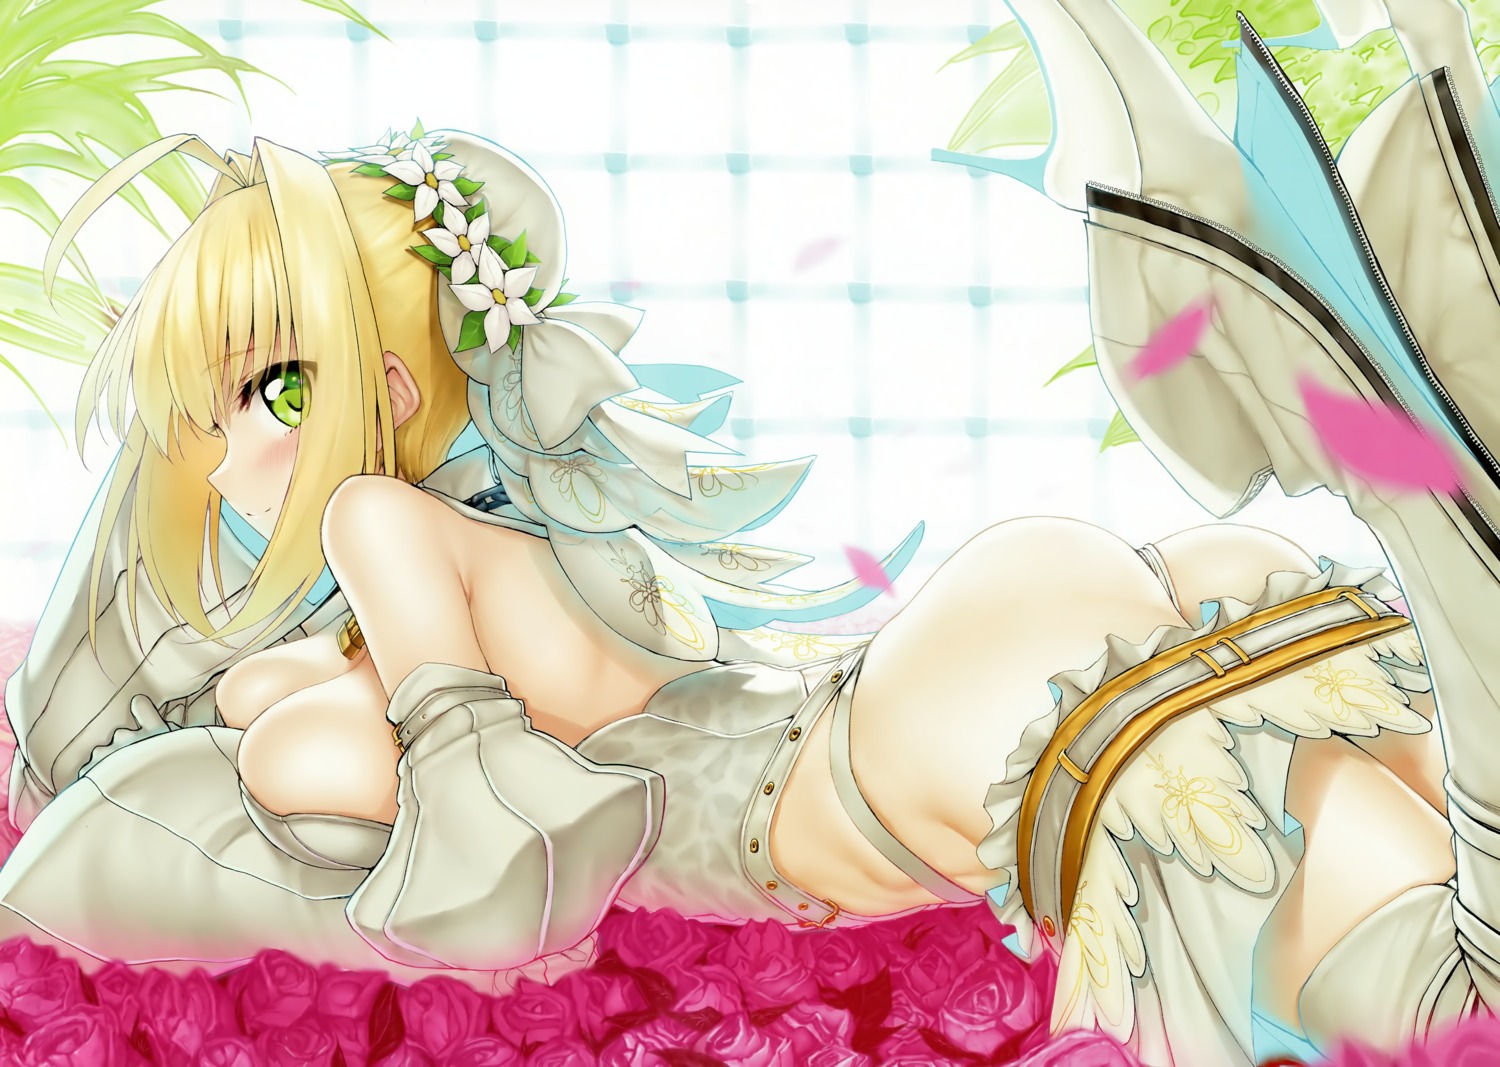 ass beauty_love cleavage fate/grand_order fixed heels leotard marked-two saber_bride saber_extra thighhighs